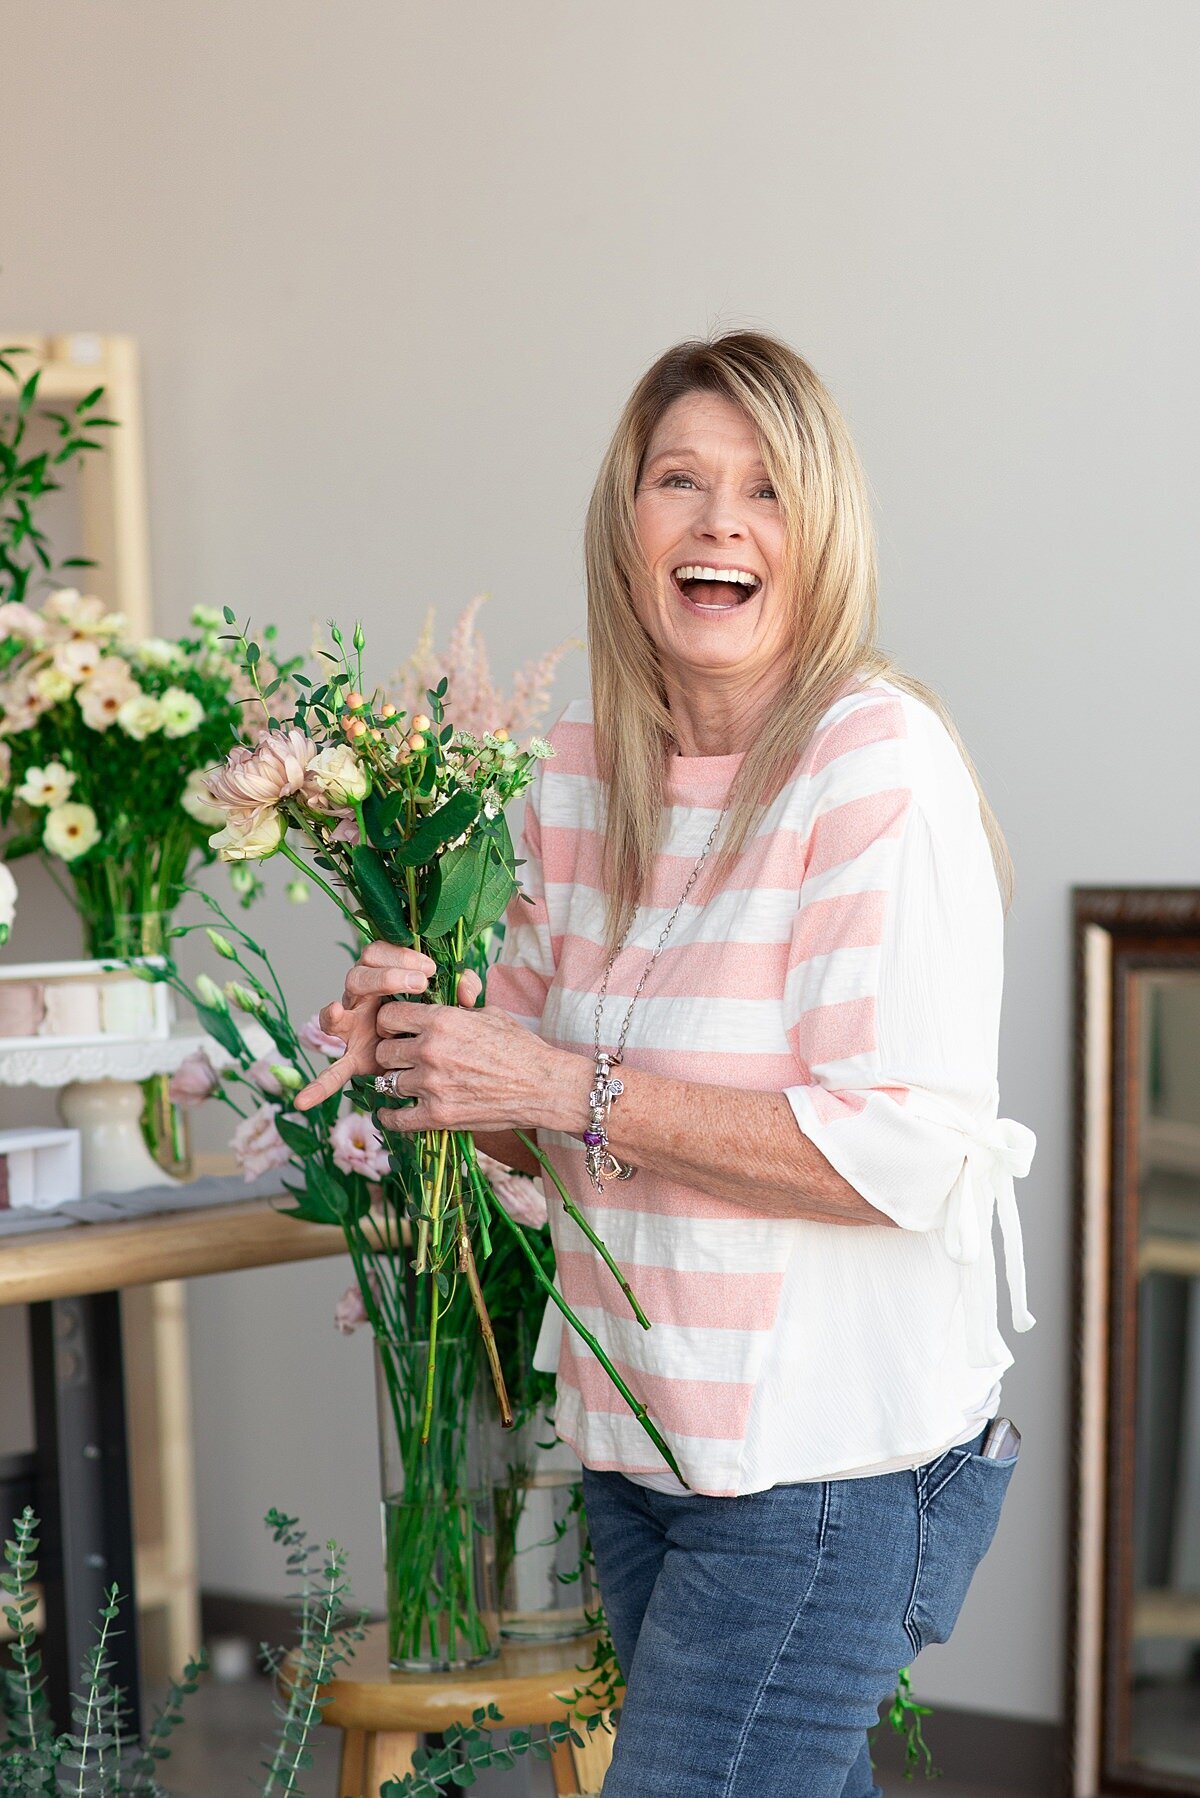 Florist wearing jeans and a striped white a coral shirt laughing while selecting flowers